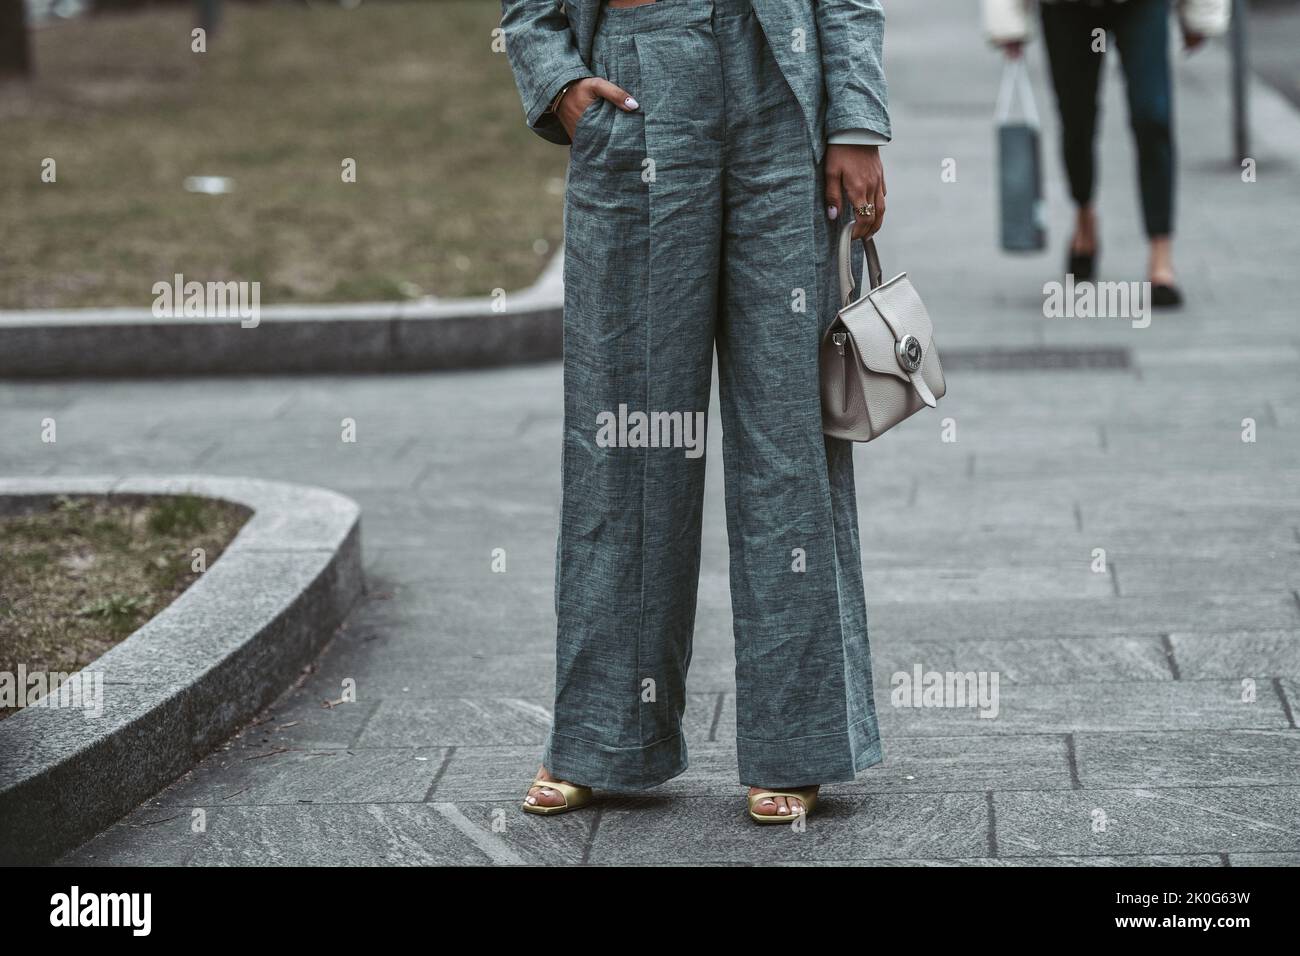 Milan, Italy - February, 24: Street style, woman wearing white cropped shirt, a gray blazer jacket, gray matching suit pants, a beige leather handbag Stock Photo